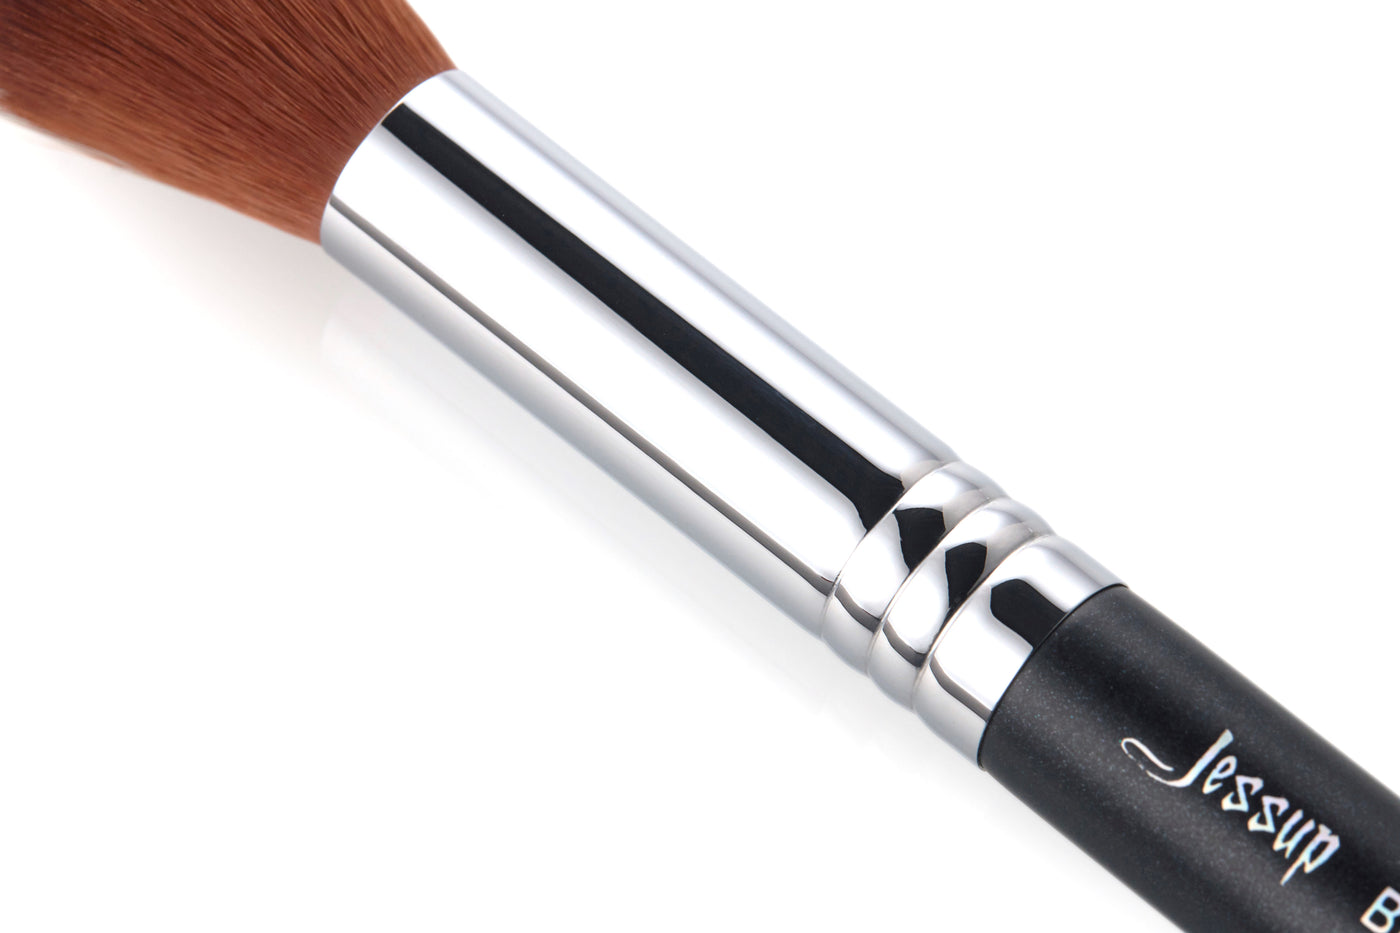 Blend Contour cosmetic brush - Jessup Beauty